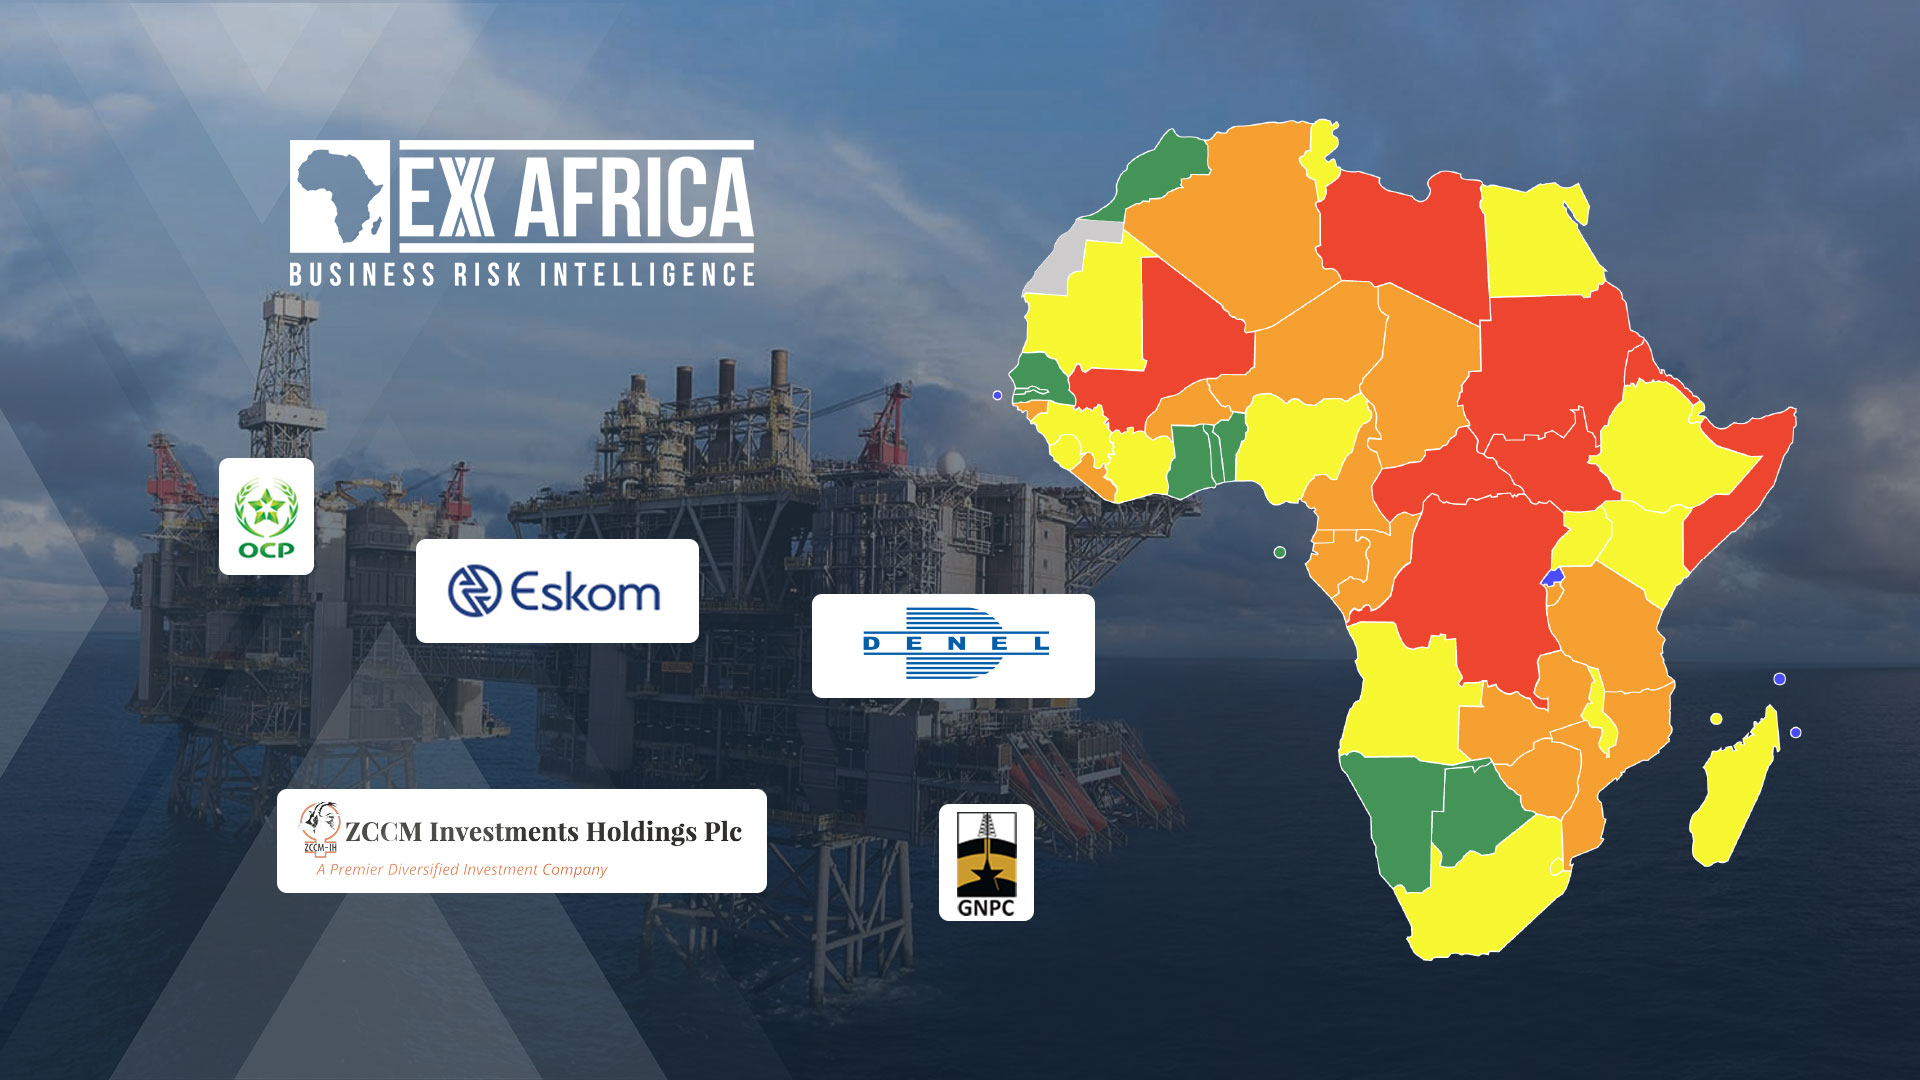 SPECIAL REPORT: THE STATE OF AFRICA’S STATE-OWNED ENTERPRISES